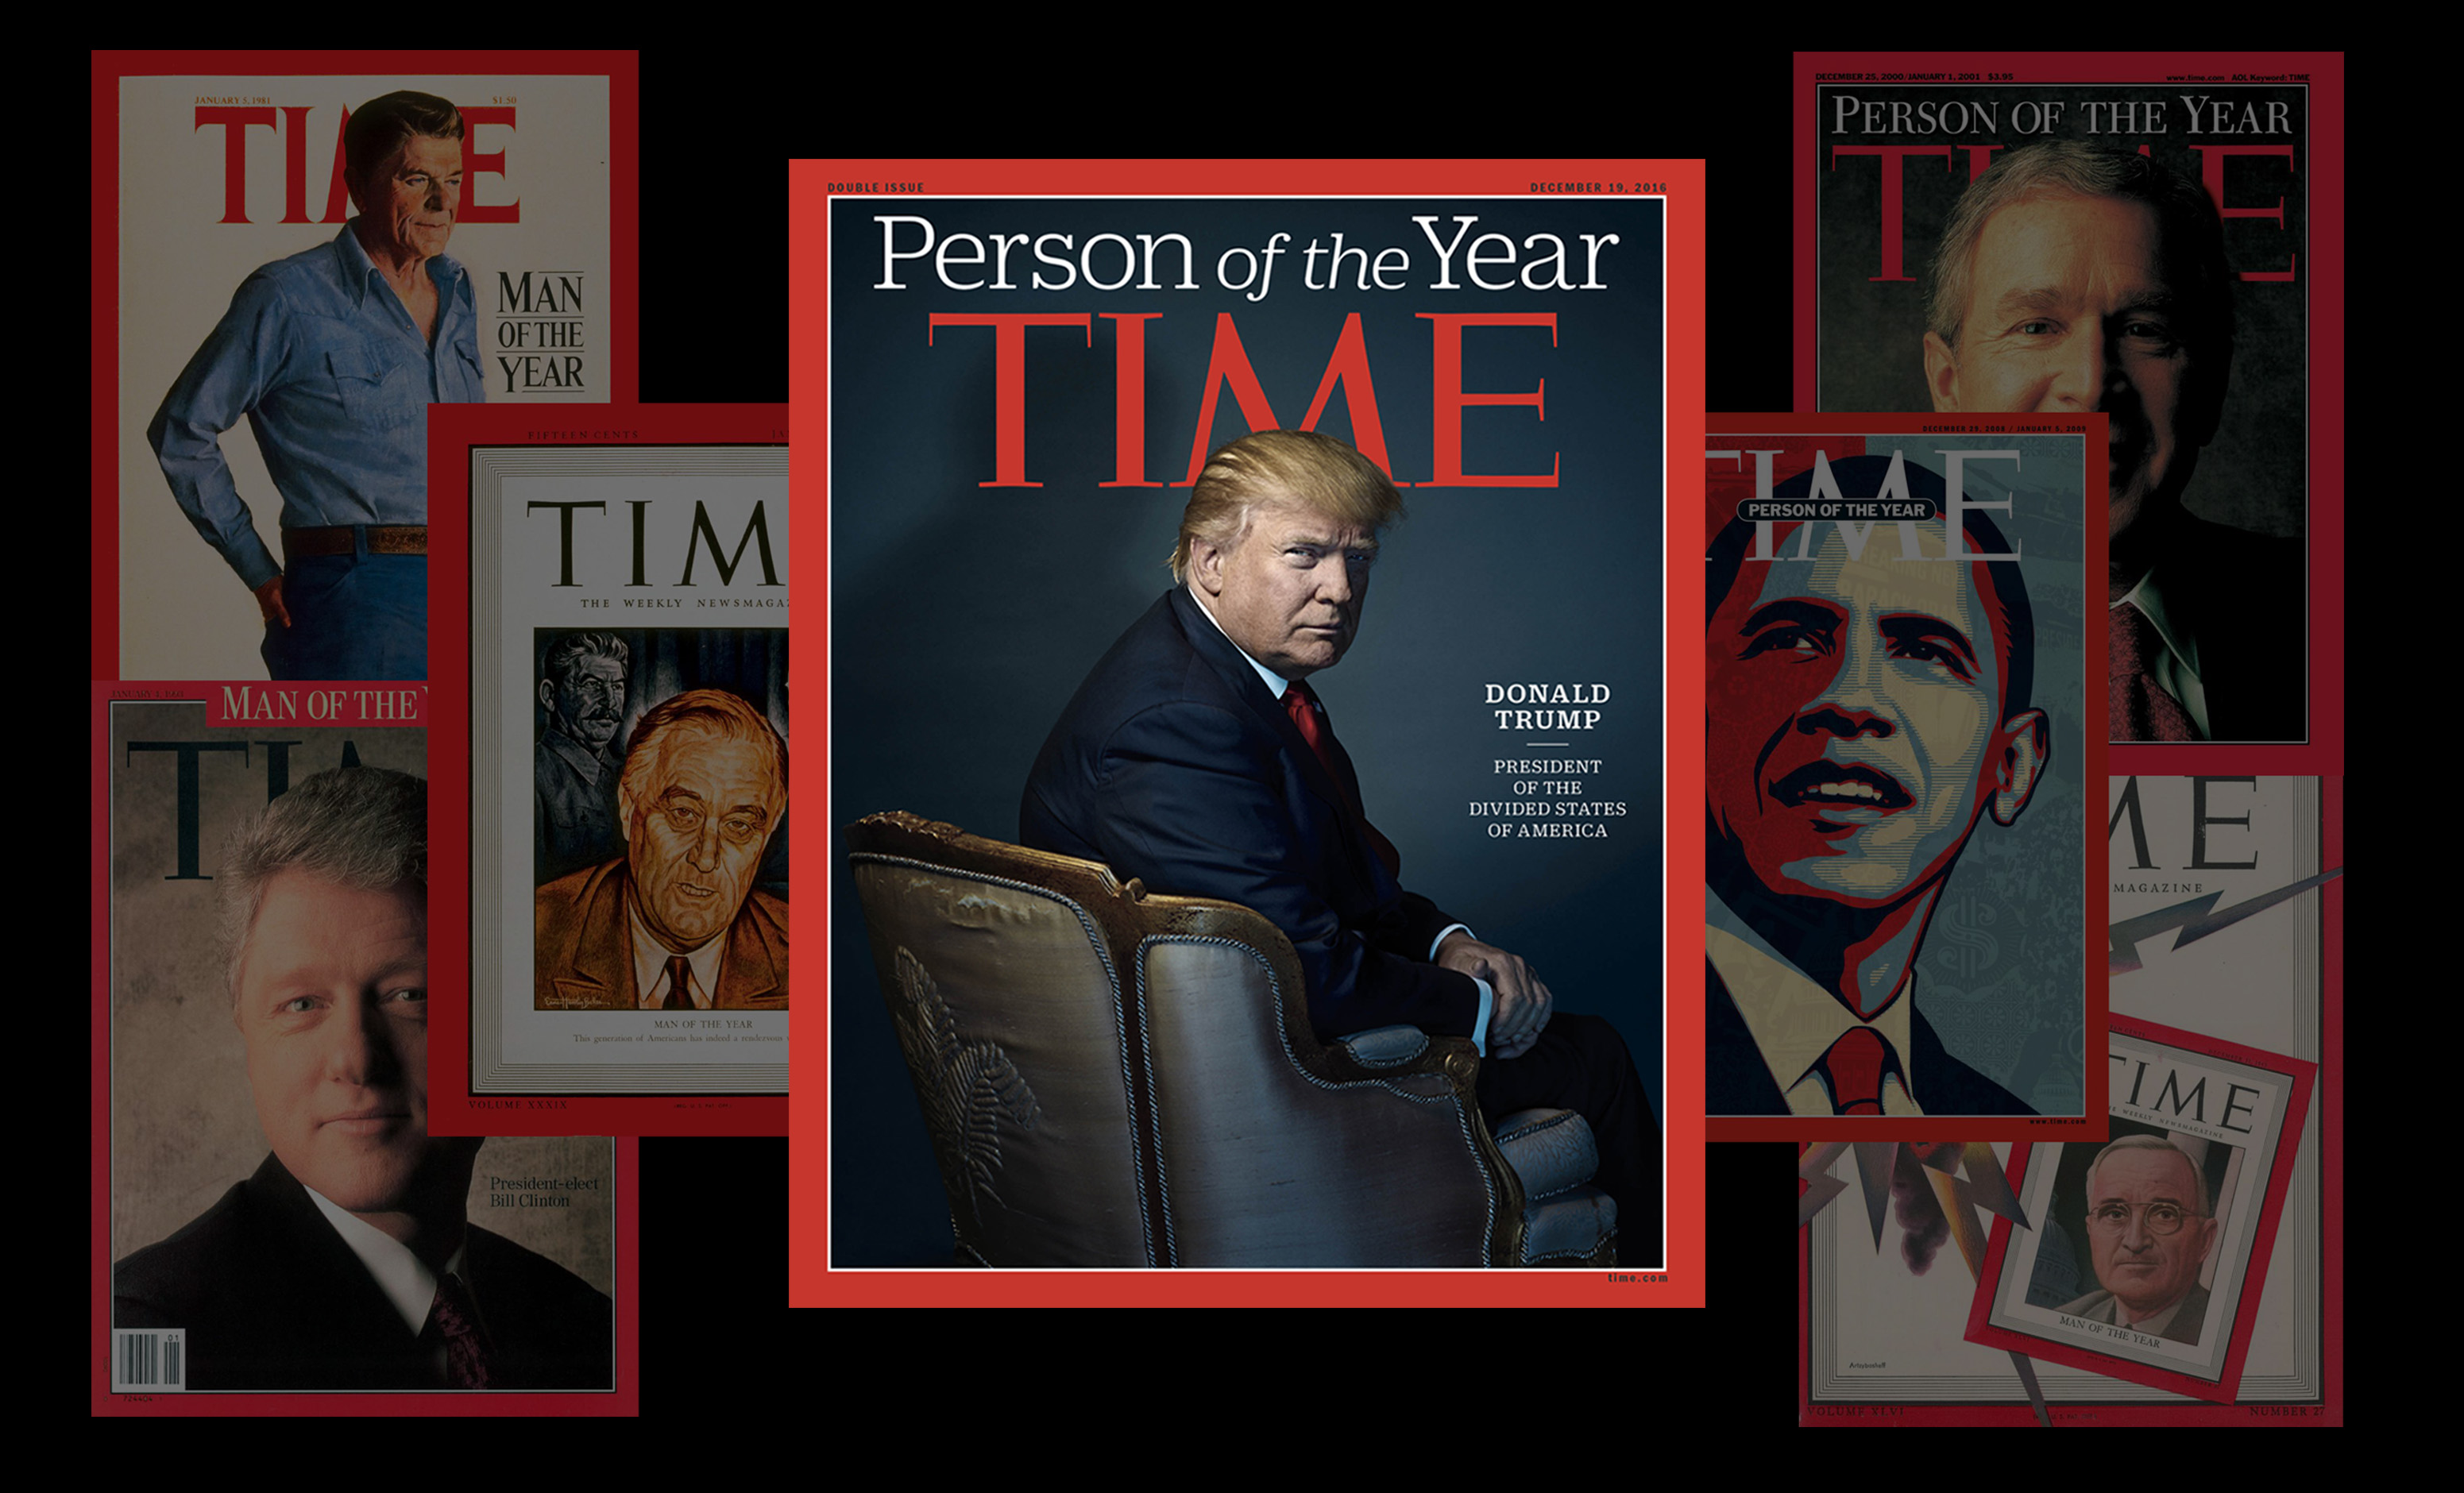 time-magazine-person-of-year-donald-trump-twitter